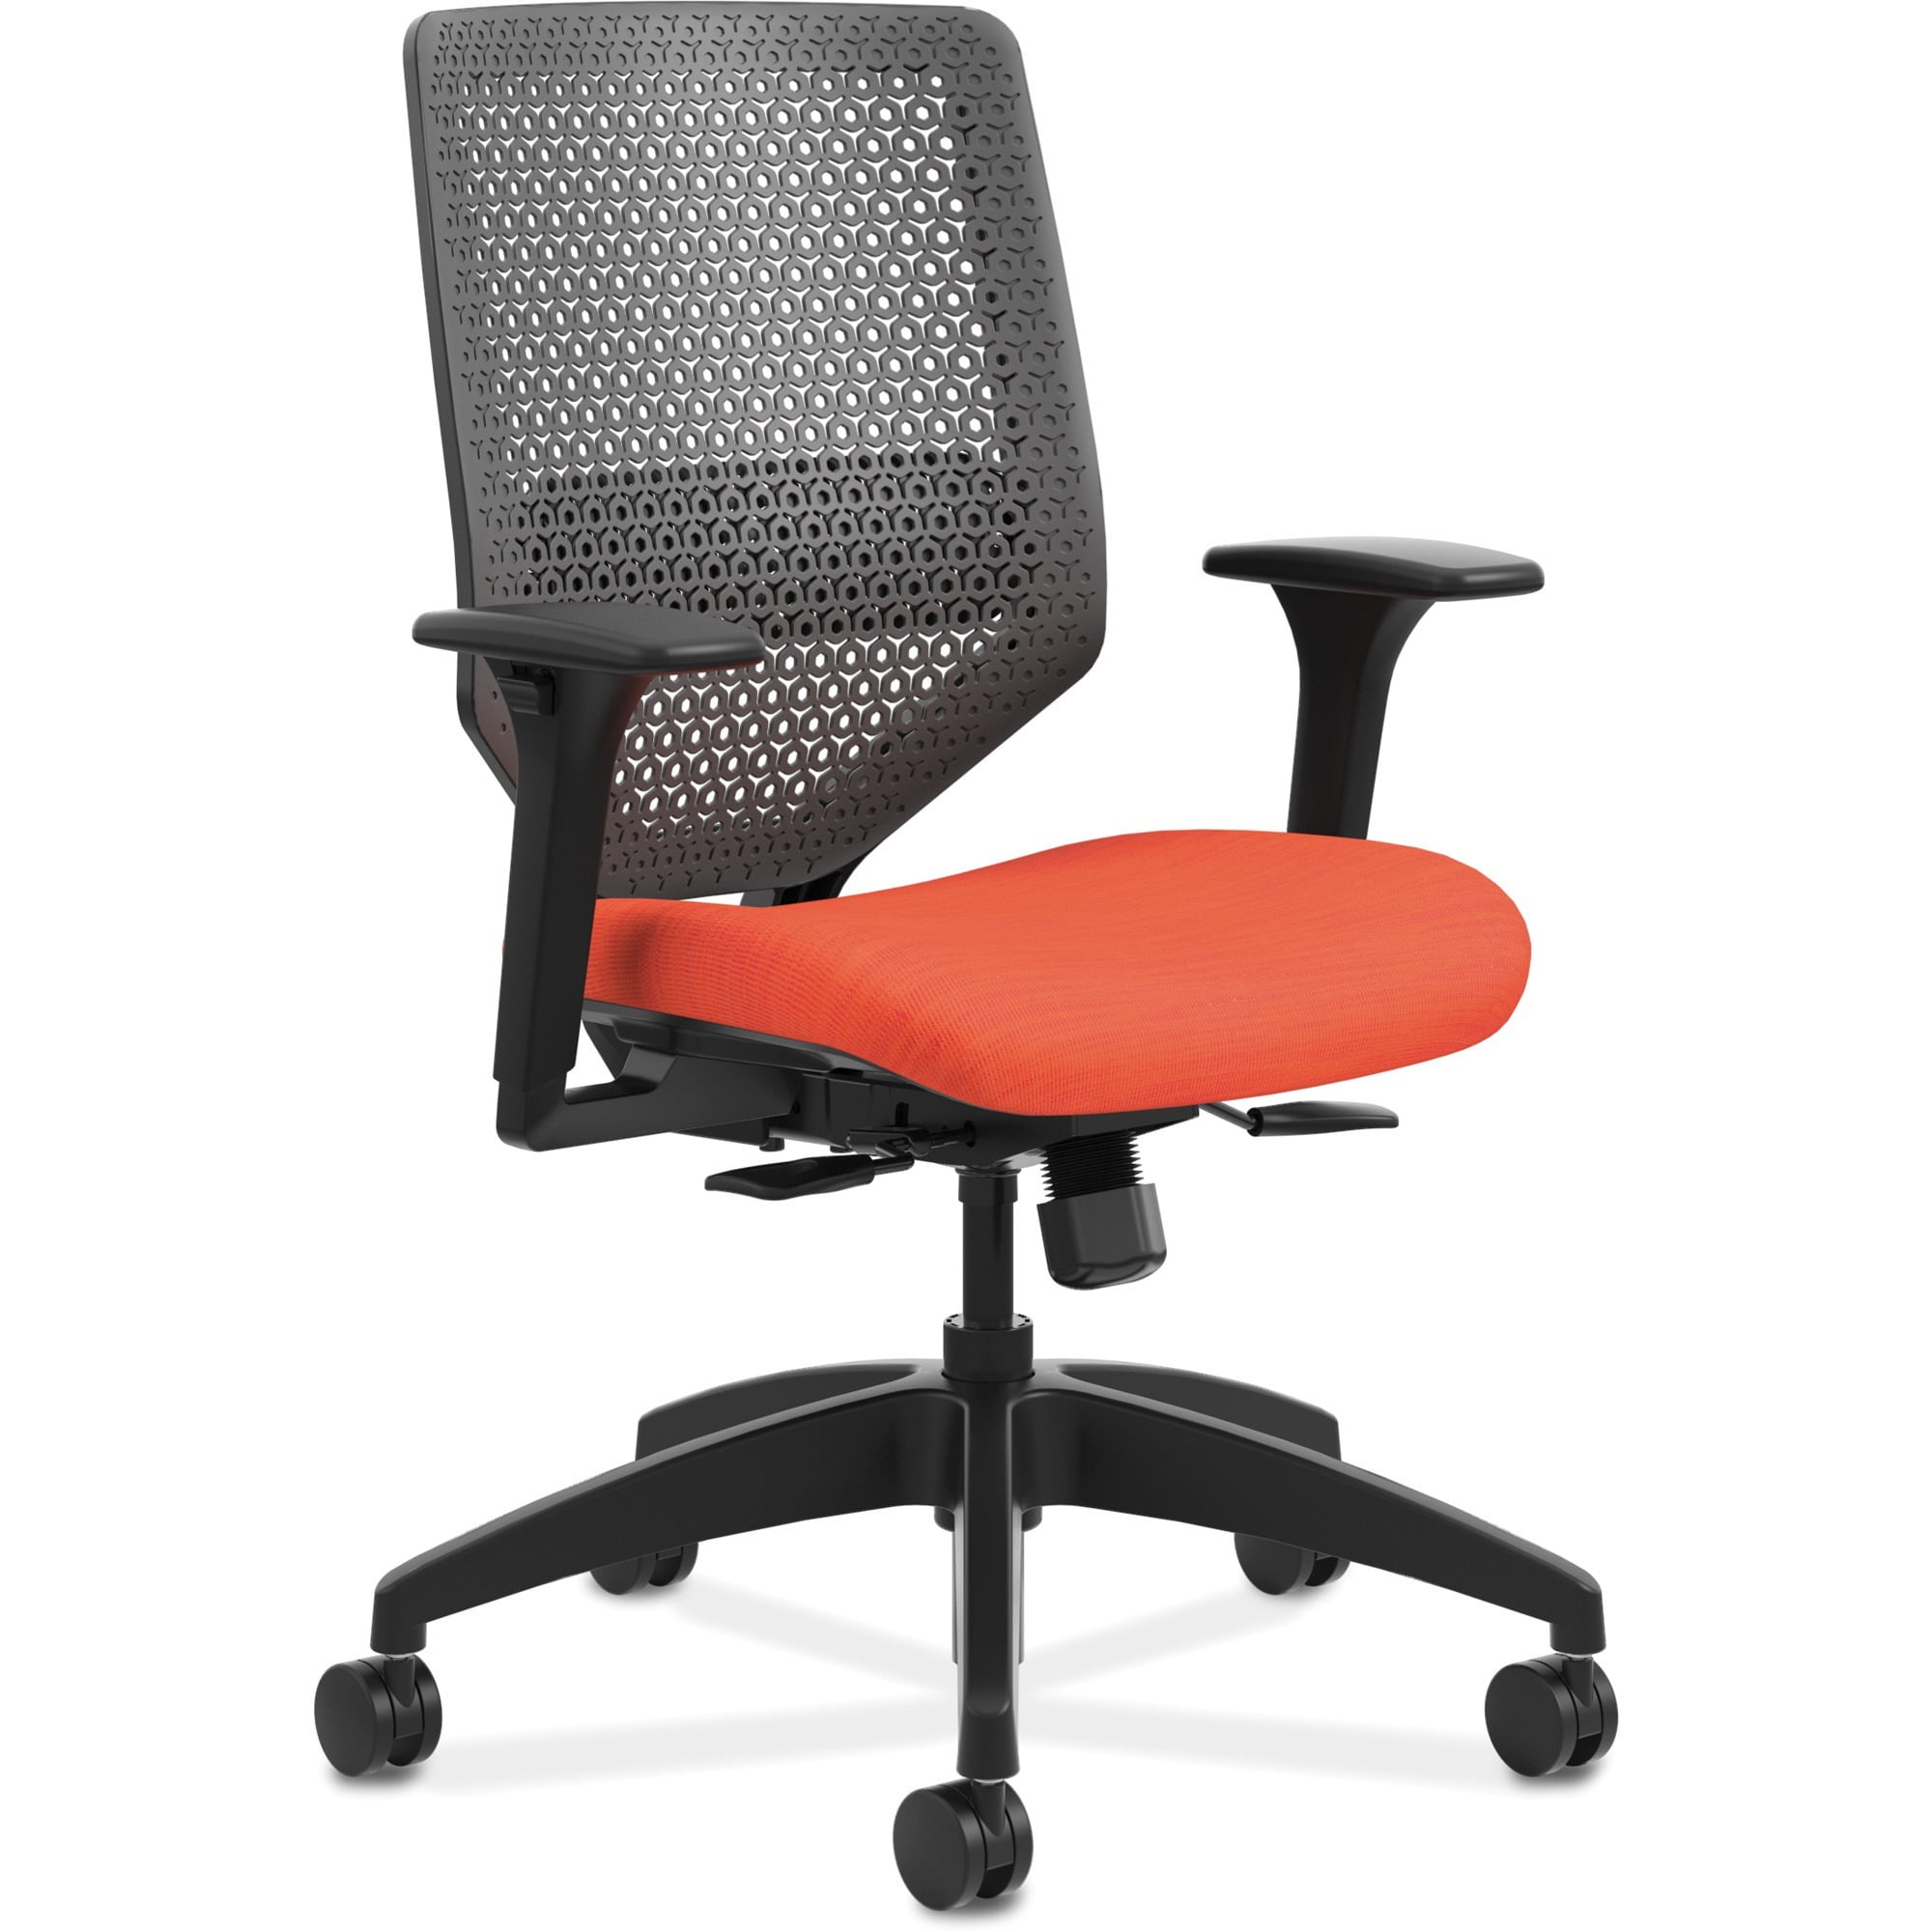 Hon Solve Seating Reactiv Mid-back Task Chair svmu1aclco46 Red Red Seat 